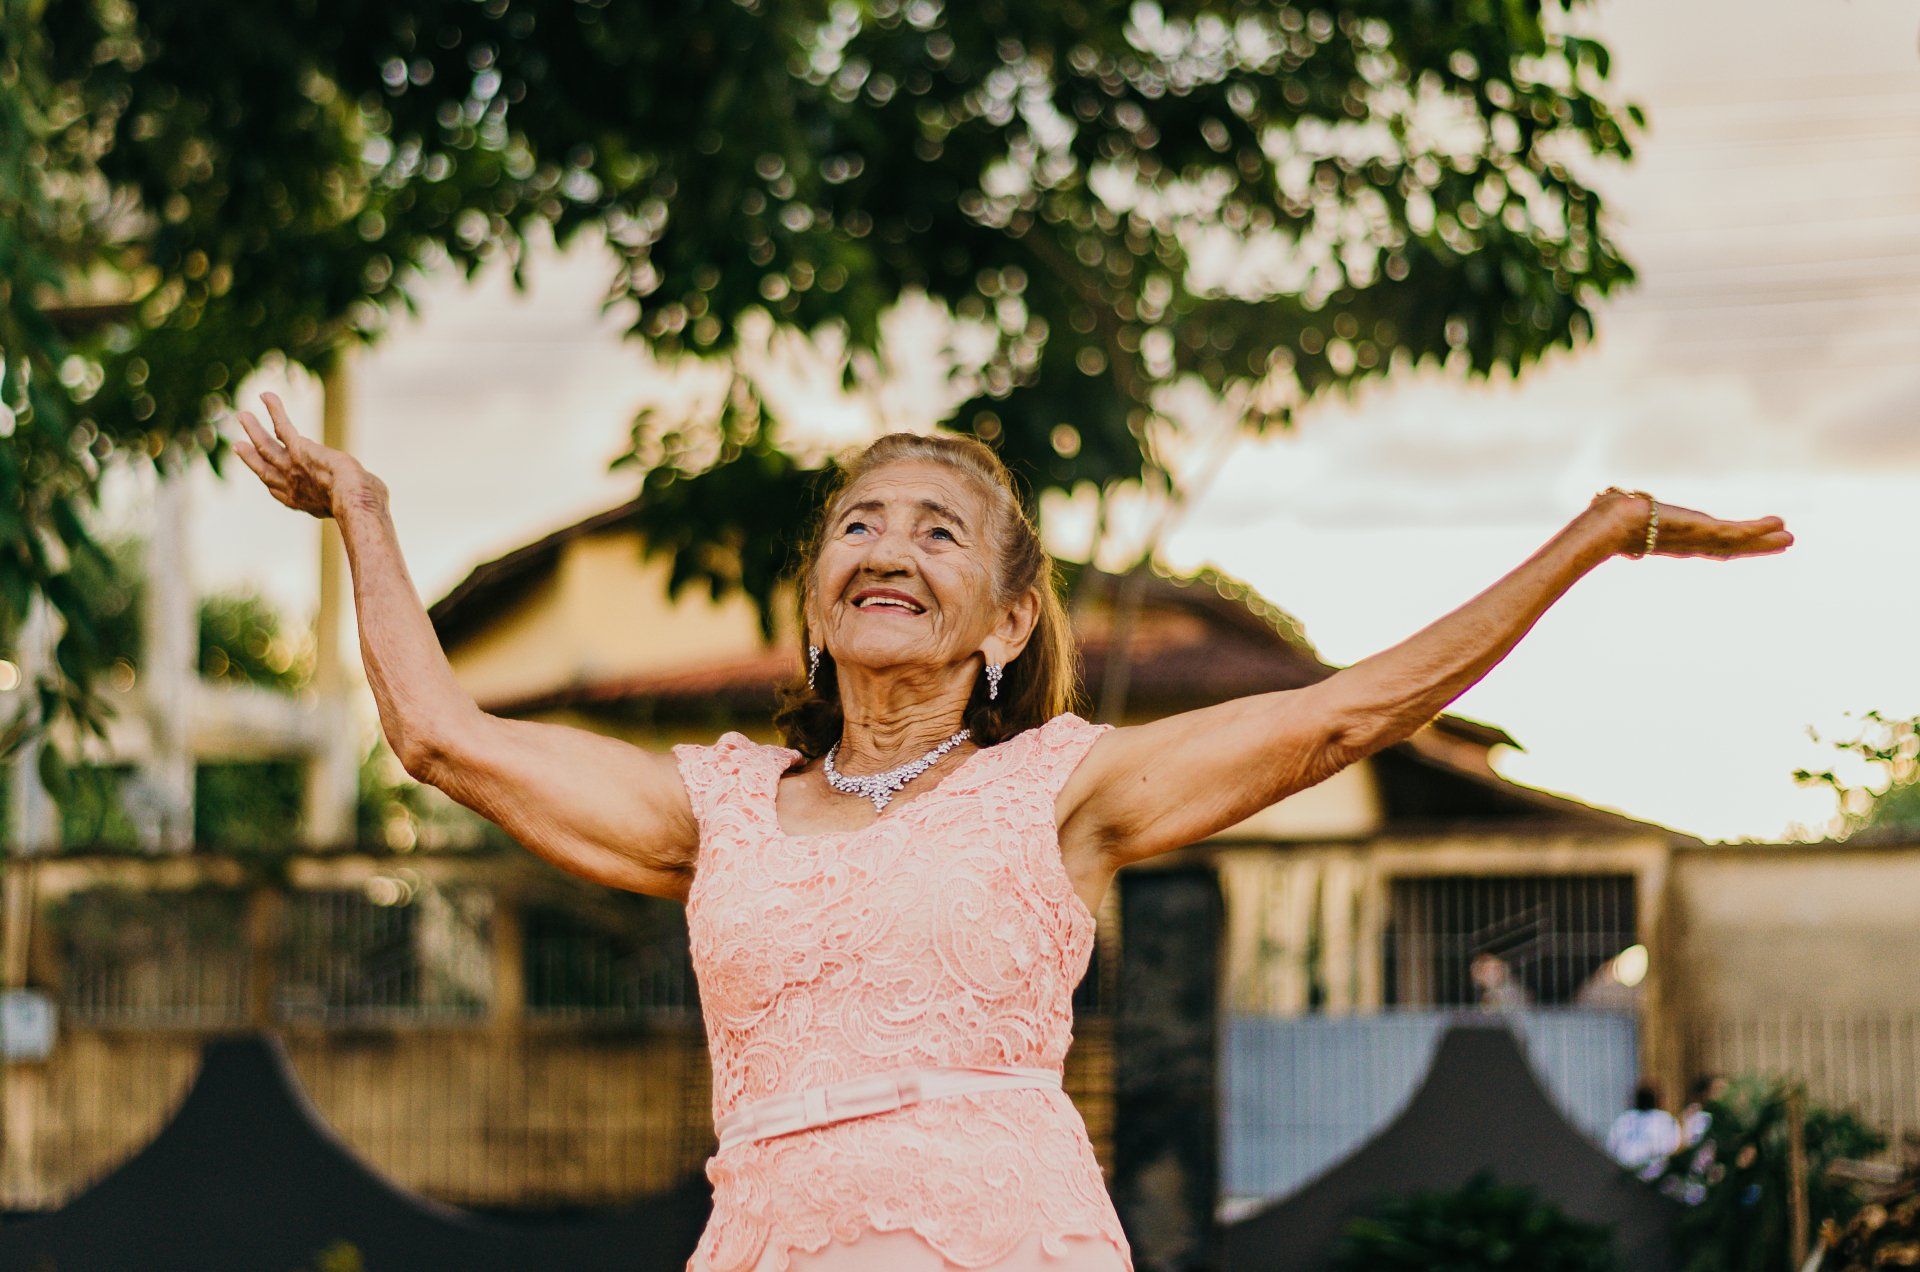 Wellbeing and the benefits of being an active senior